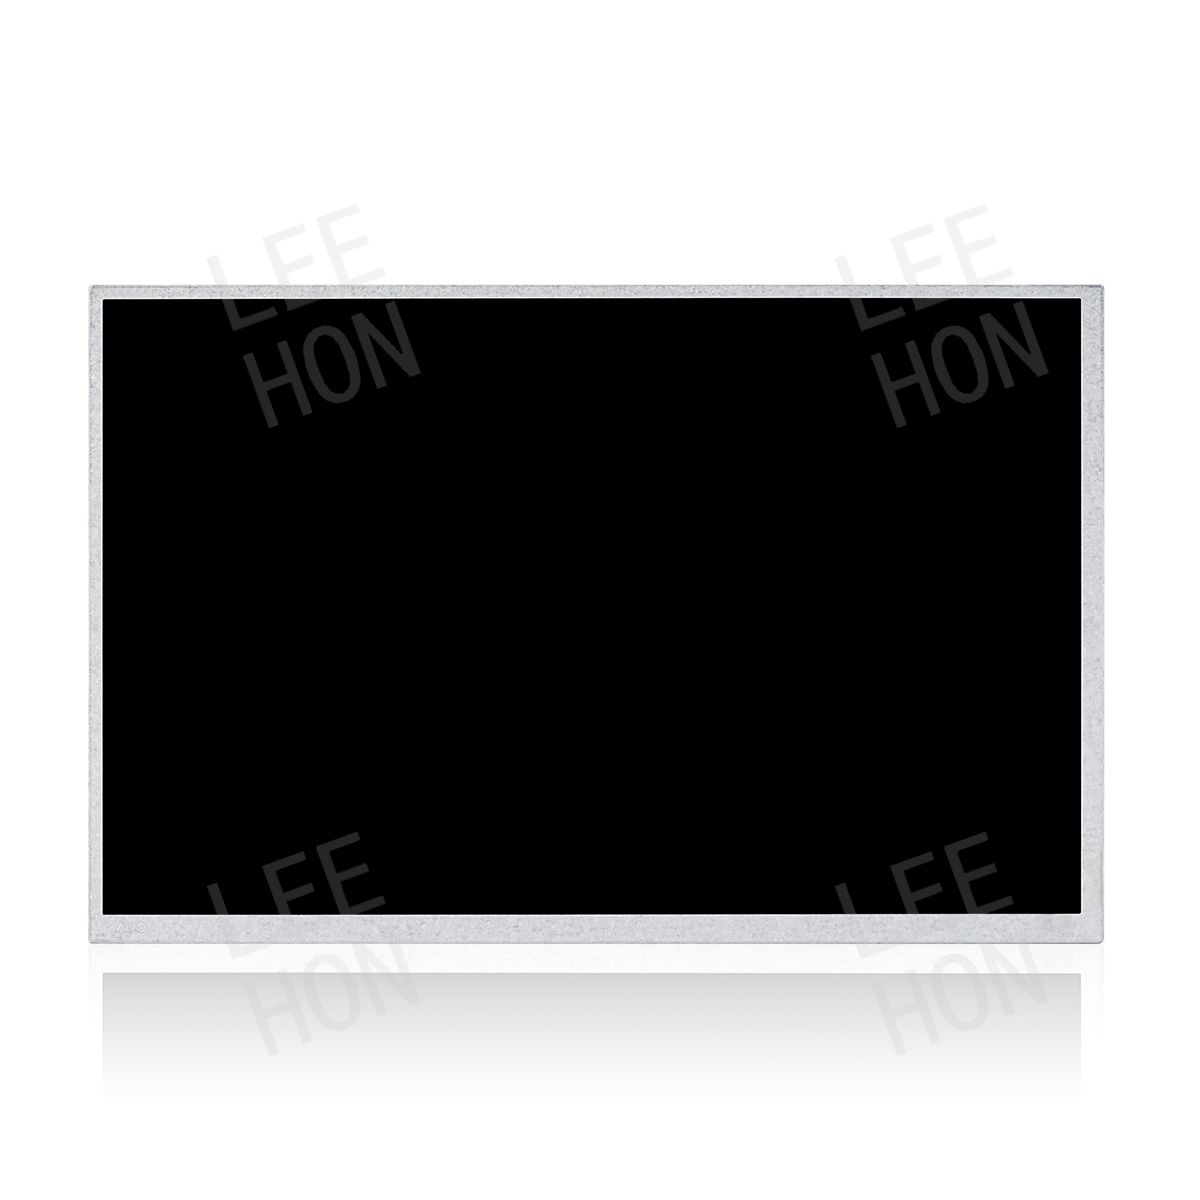 AUO 10.1 Inch 1280x800 WXGA LCD Panel TFT LCD IPS Display G101EAN02.1 400nits and 40 pins LVDS